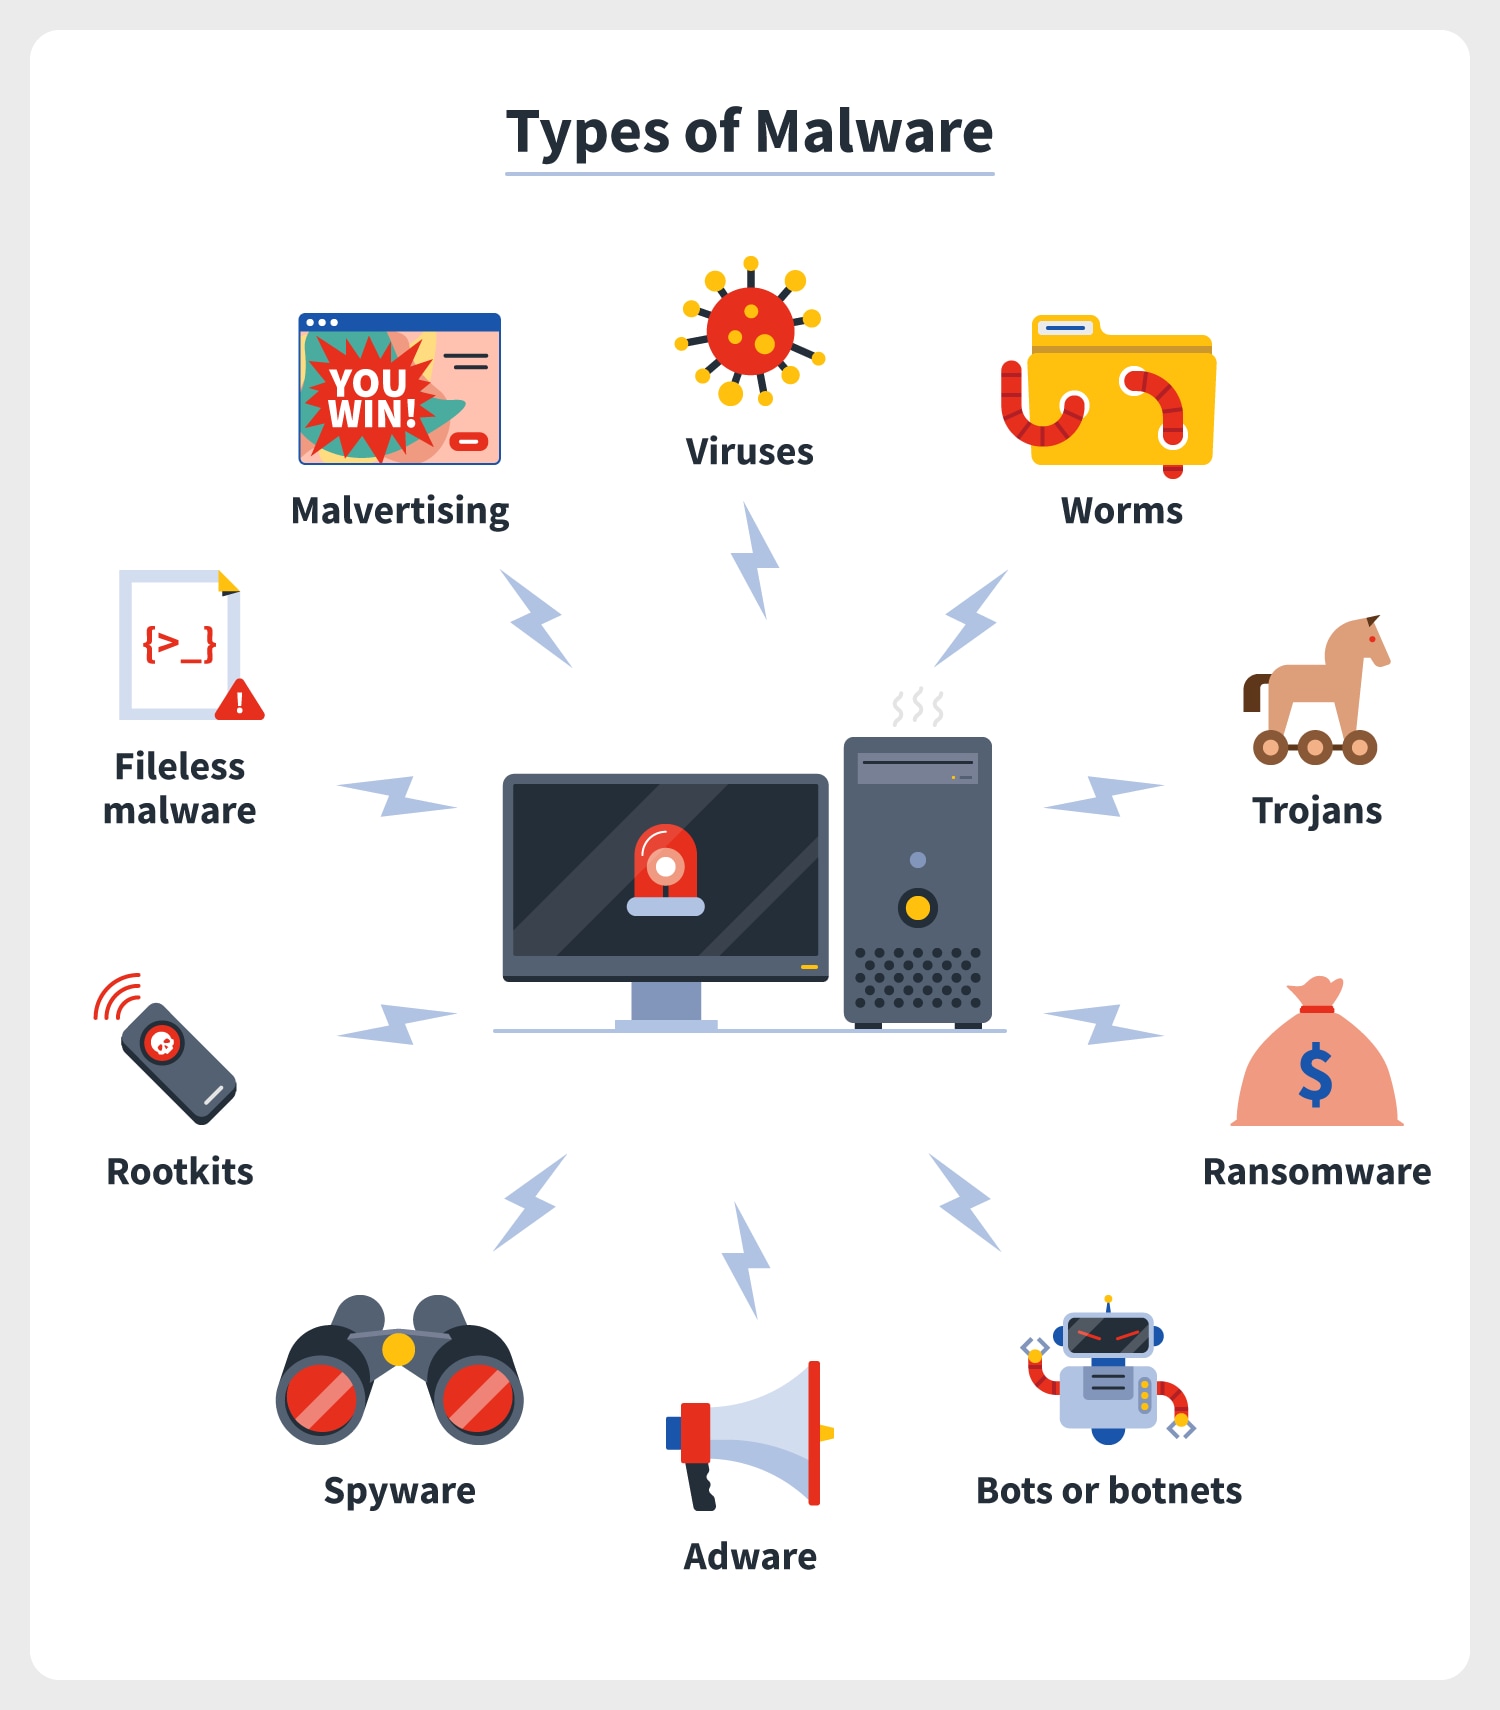 all kinds of spyware and adware including keyloggers trojan horses